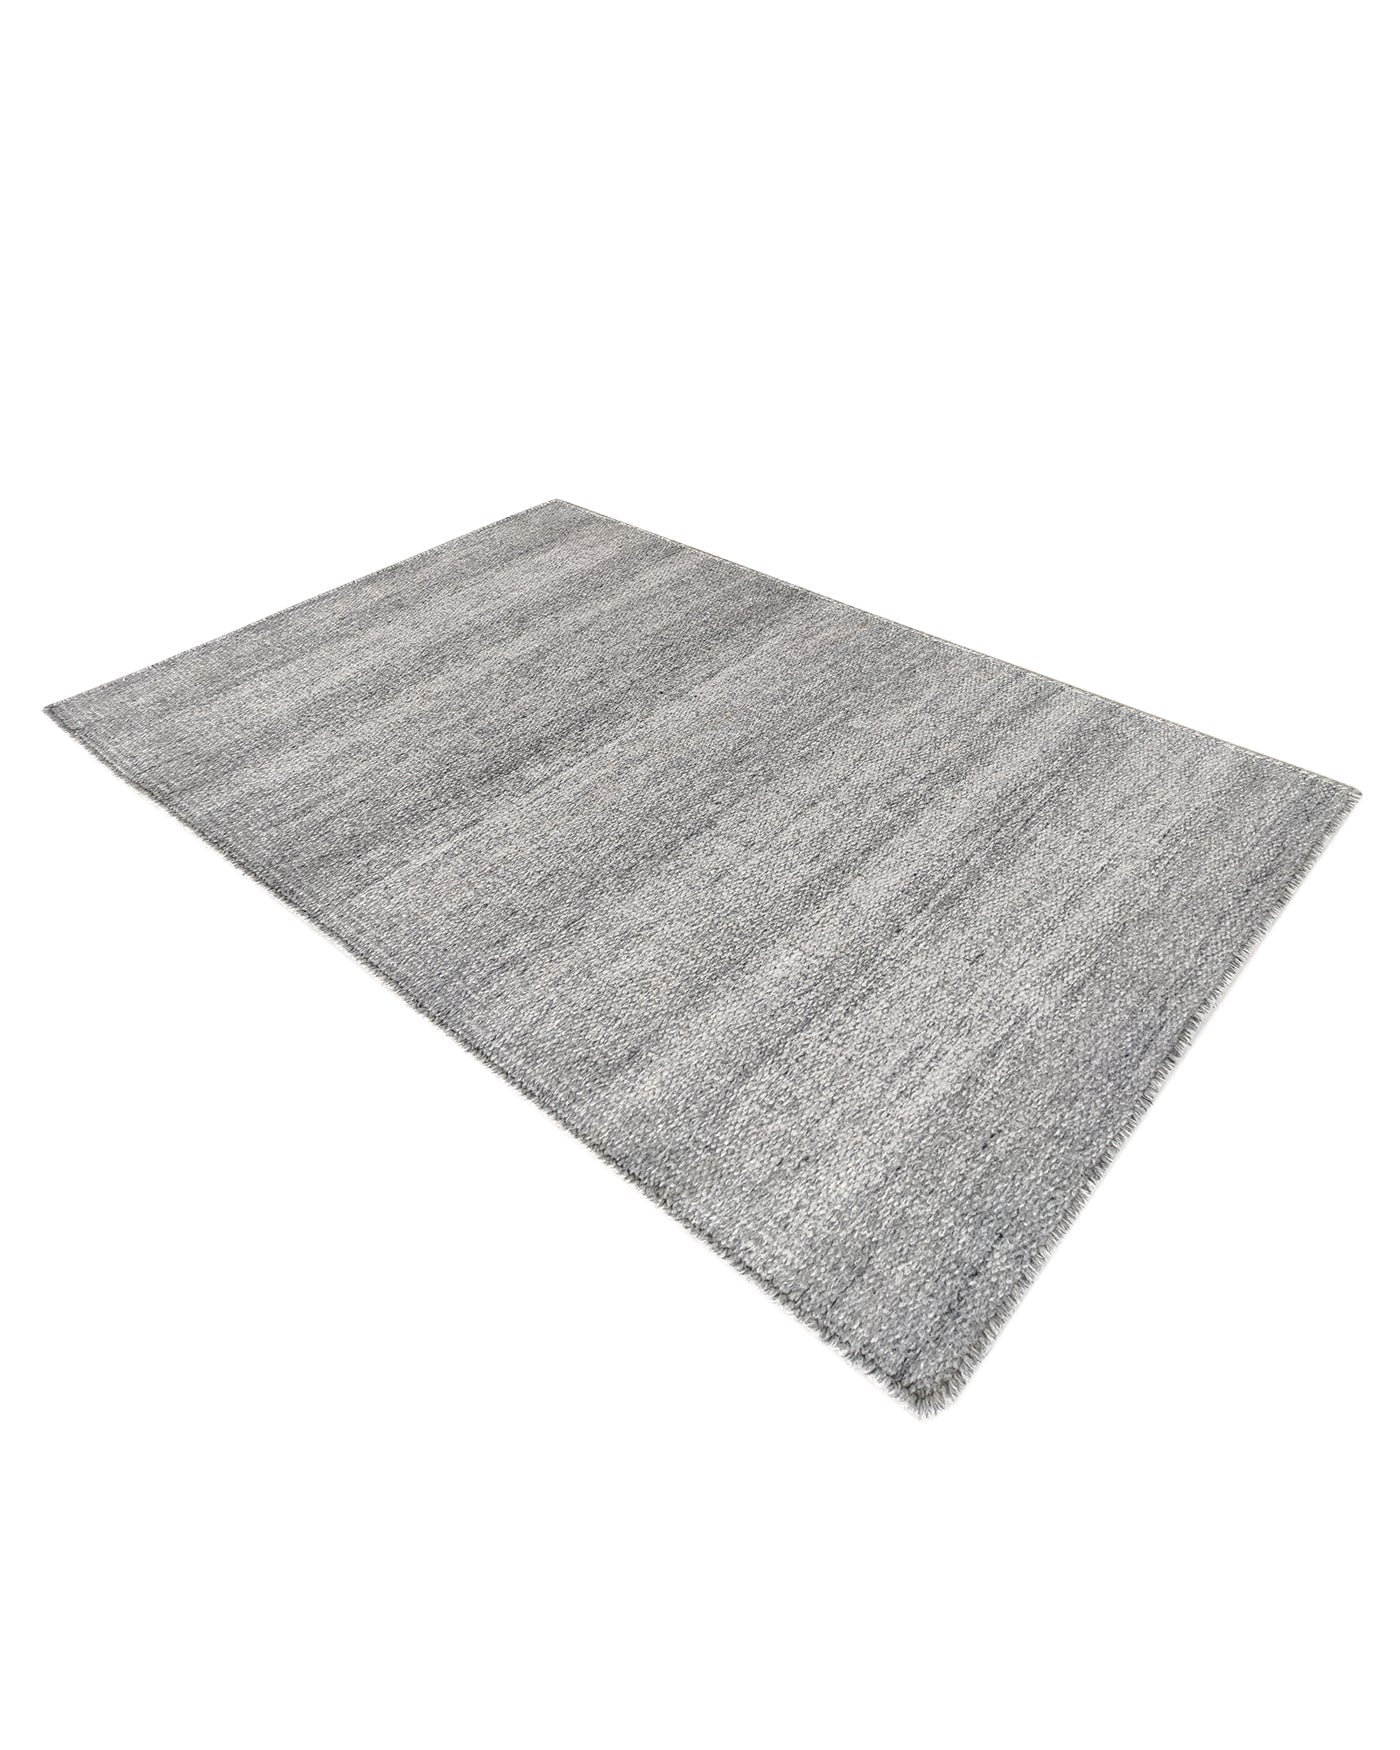 Hand Made Light Grey Color Woven Rug (2 Sizes)